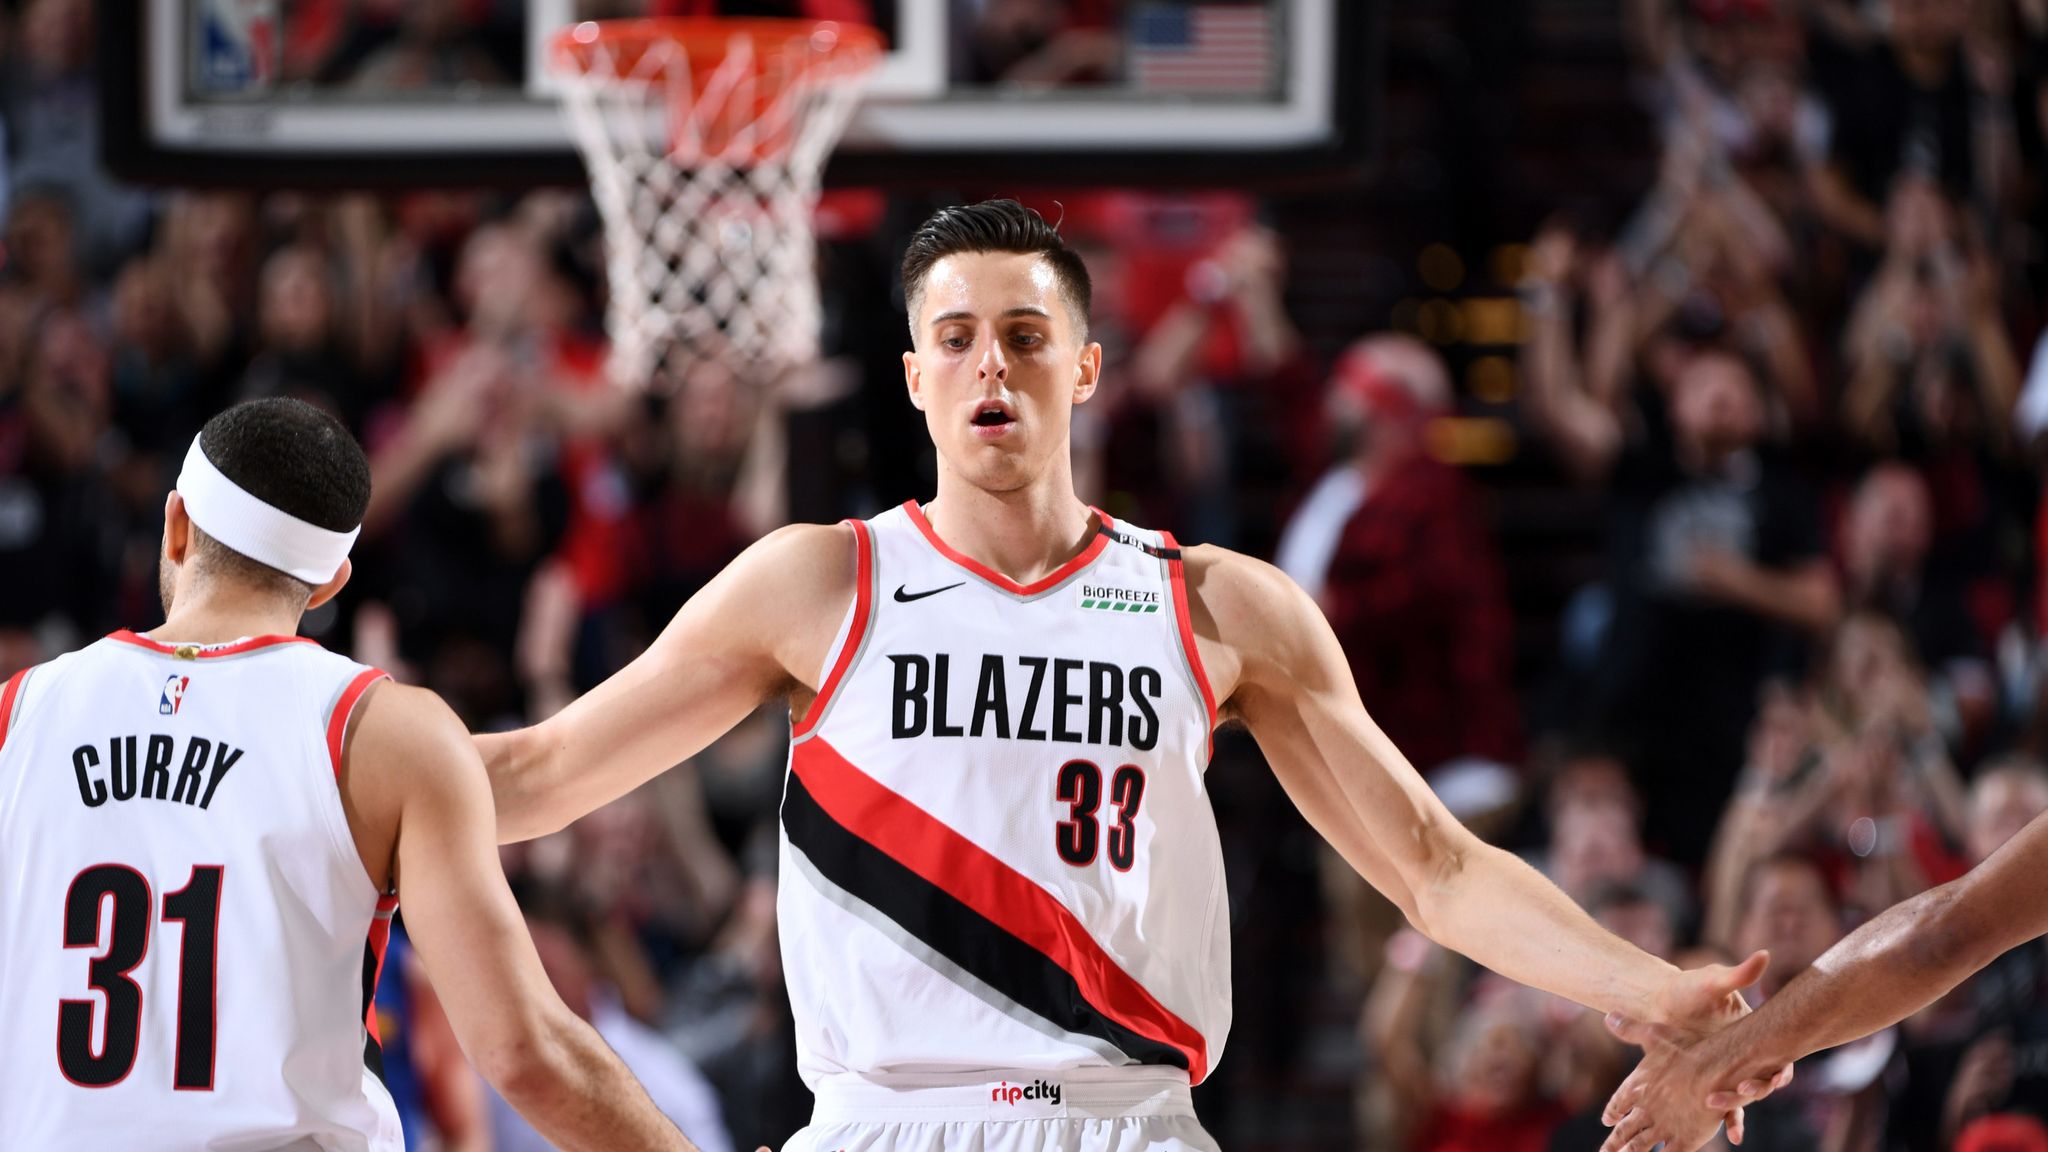 Blazers: 5 goals for Zach Collins to achieve in the 2018-2019